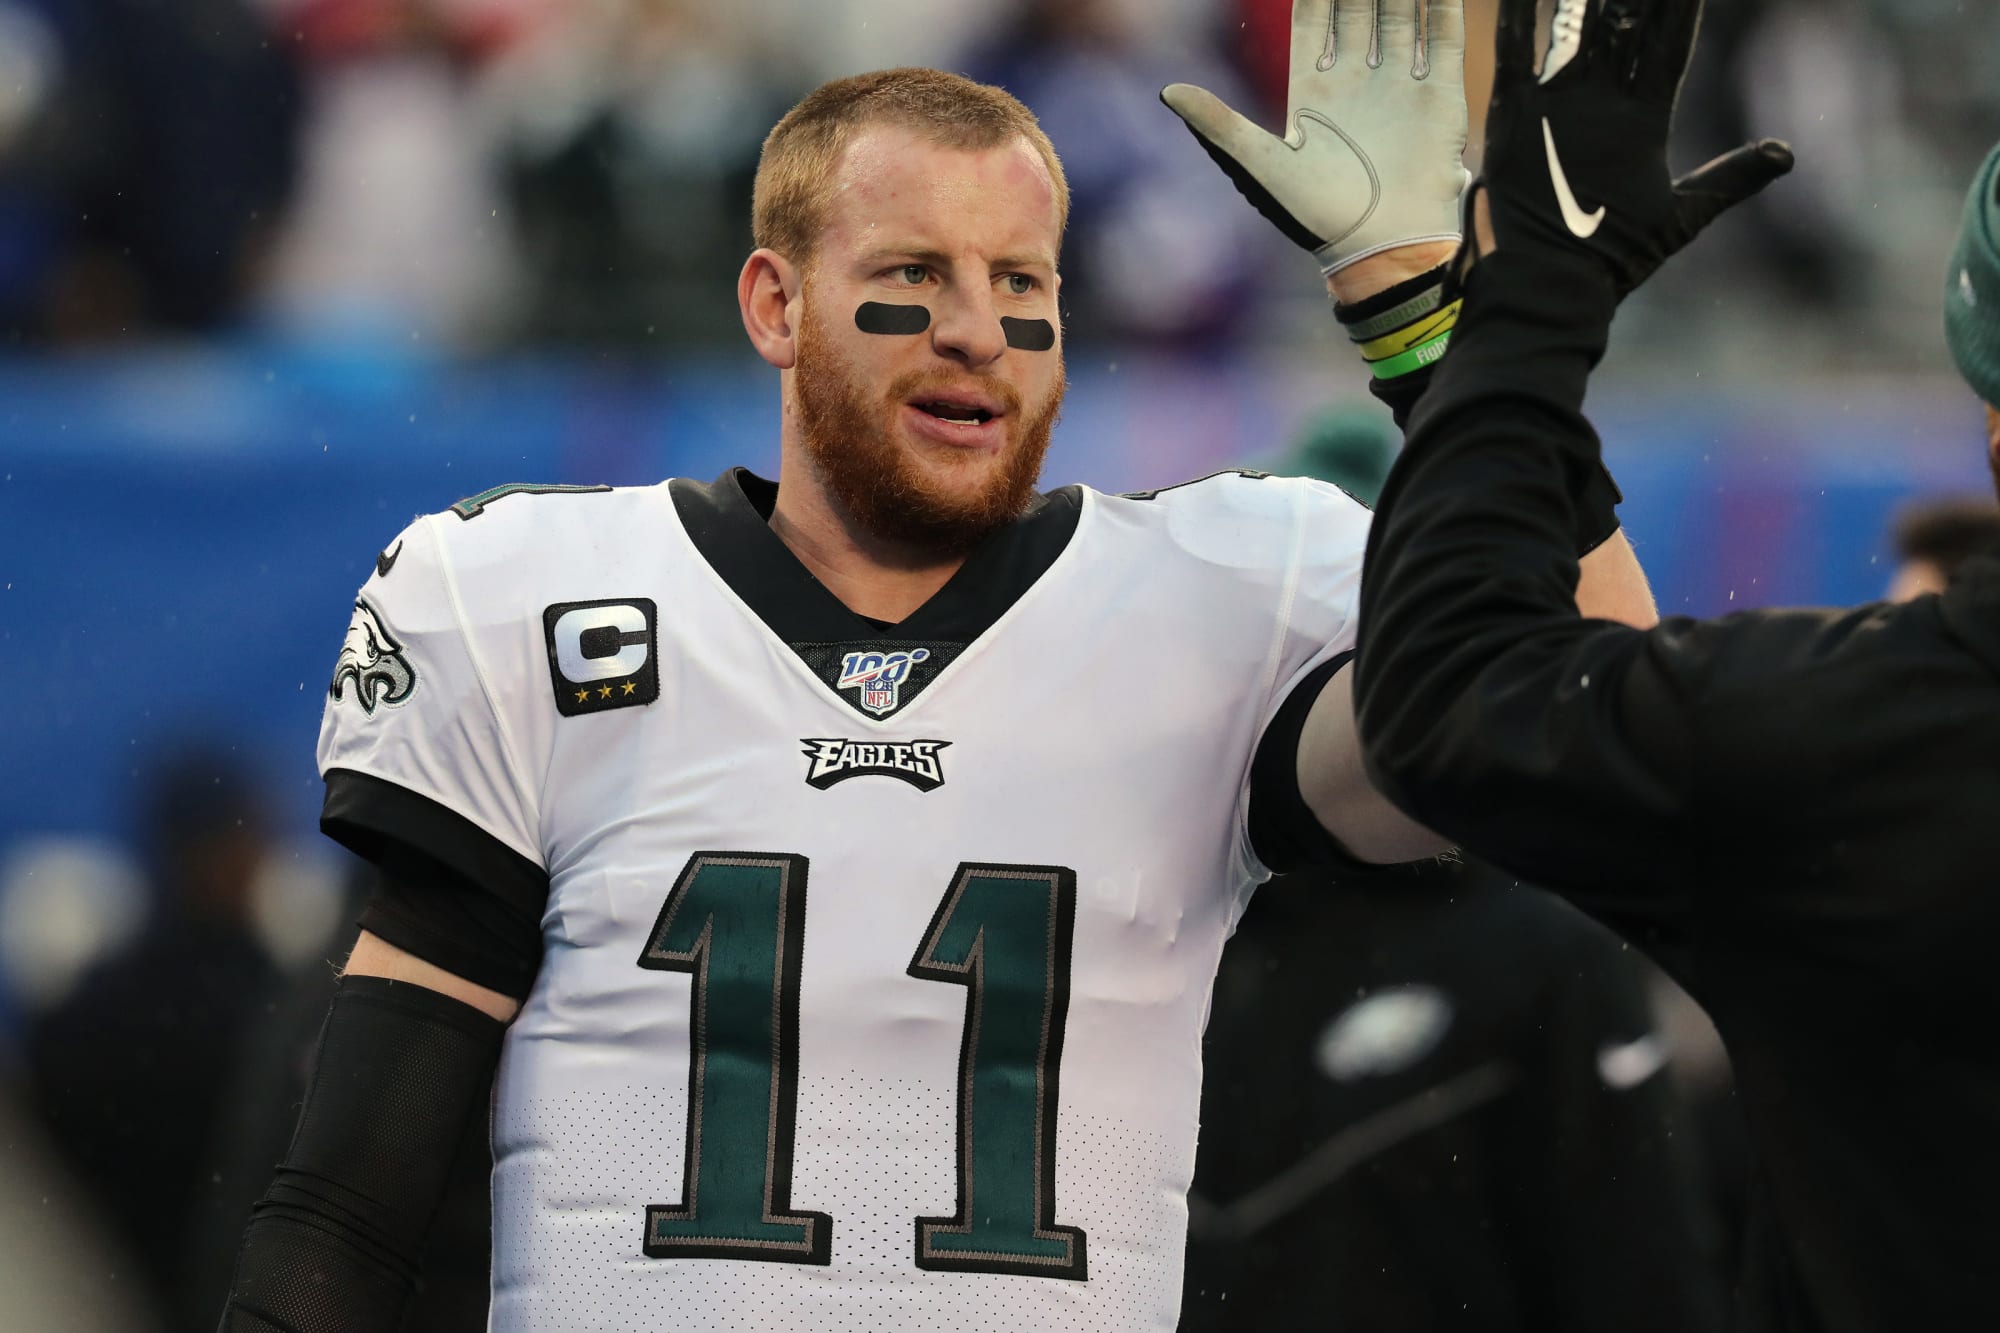 Philadelphia Eagles: Carson Wentz has added some serious muscle